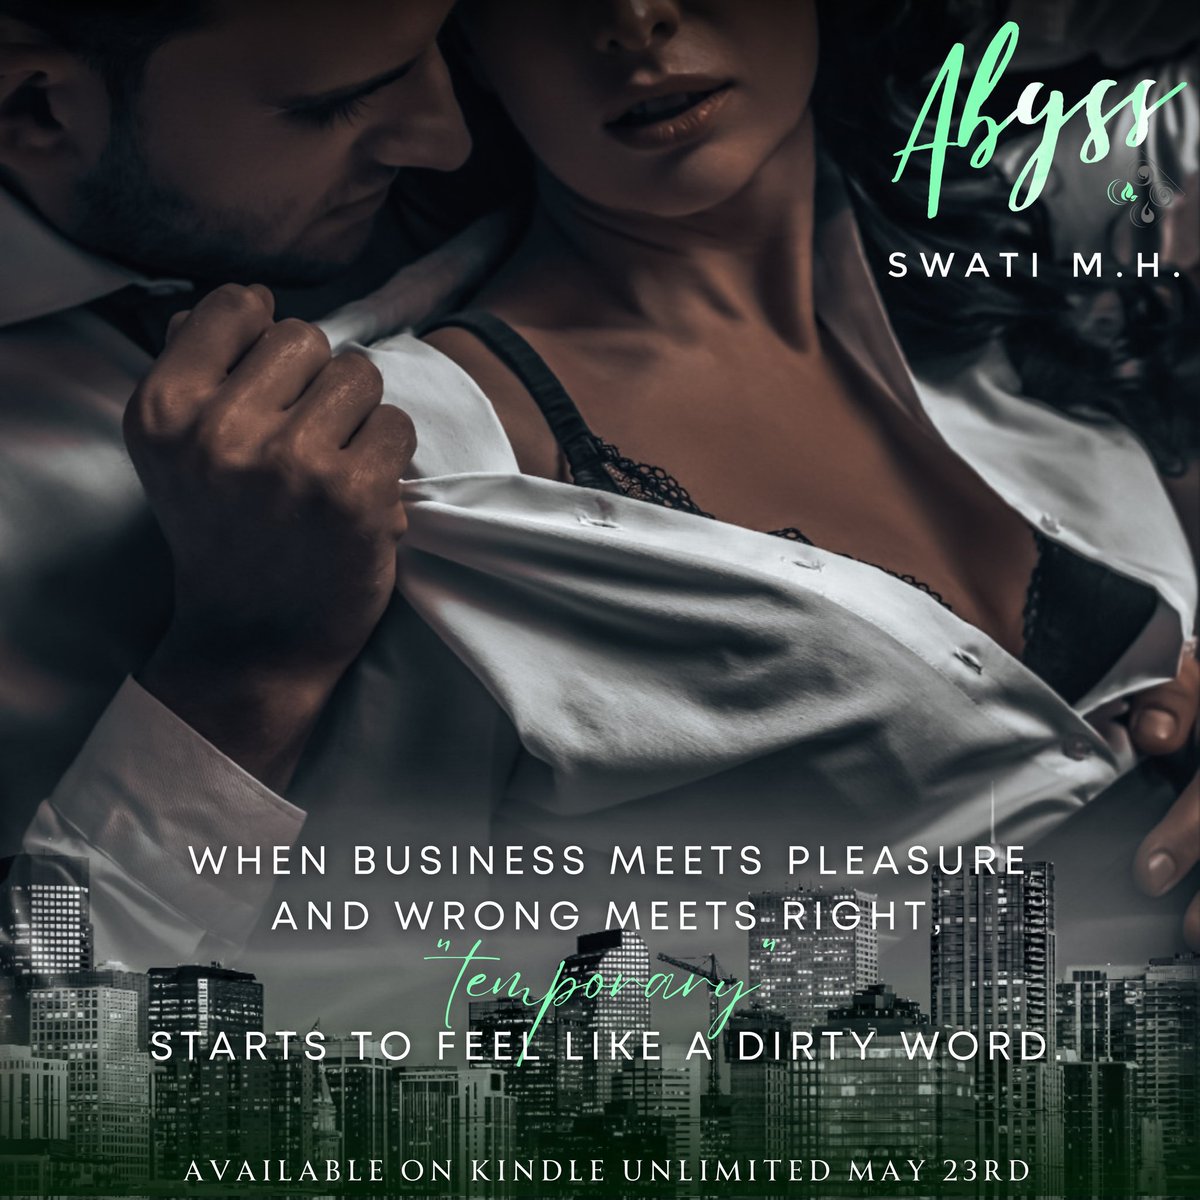 ✨TEASER: ABYSS by #swatimh is coming May 23

#PreOrder a.co/d/4dvYfKr

#bookteaser #comingsoon #enemiestolovers #swatimh #bestfriendsdad #workplaceromance #millionaireromance #bookstagram #booktok #romancebooks #spicyromance #theauthoragency @theauthoragency